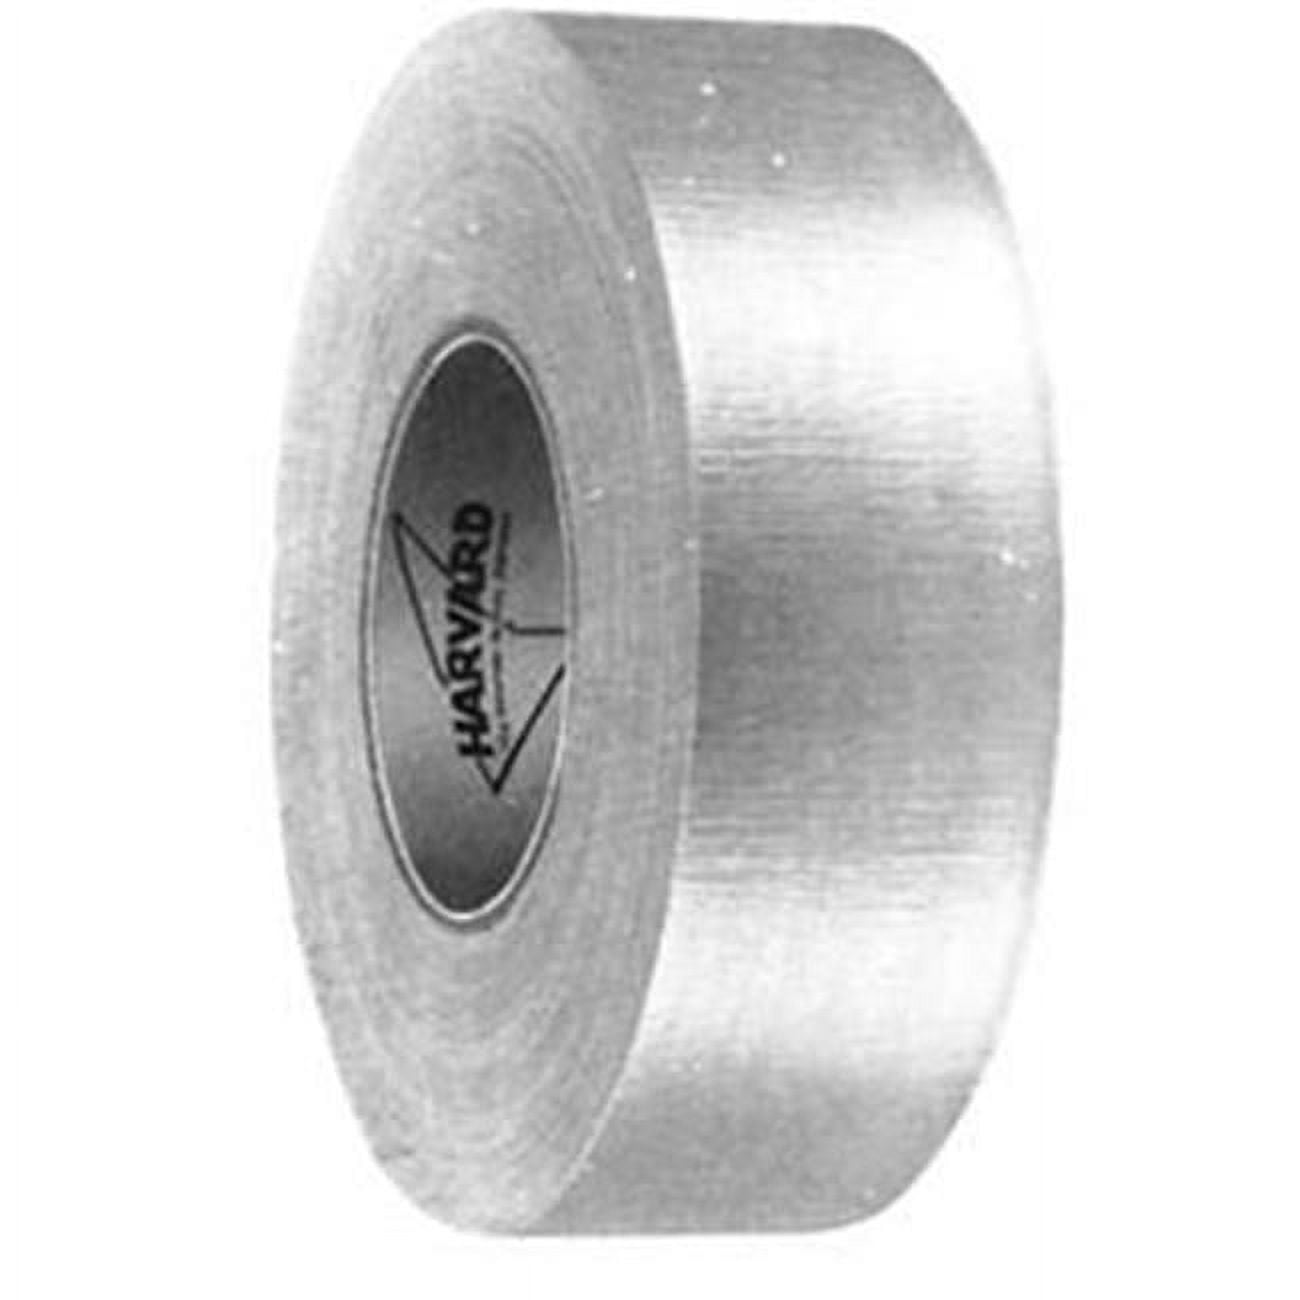 Bertech Copper Conductive Tape, 1/4 Wide x 36 Yards Long, 2.75 Mil Thick on A 